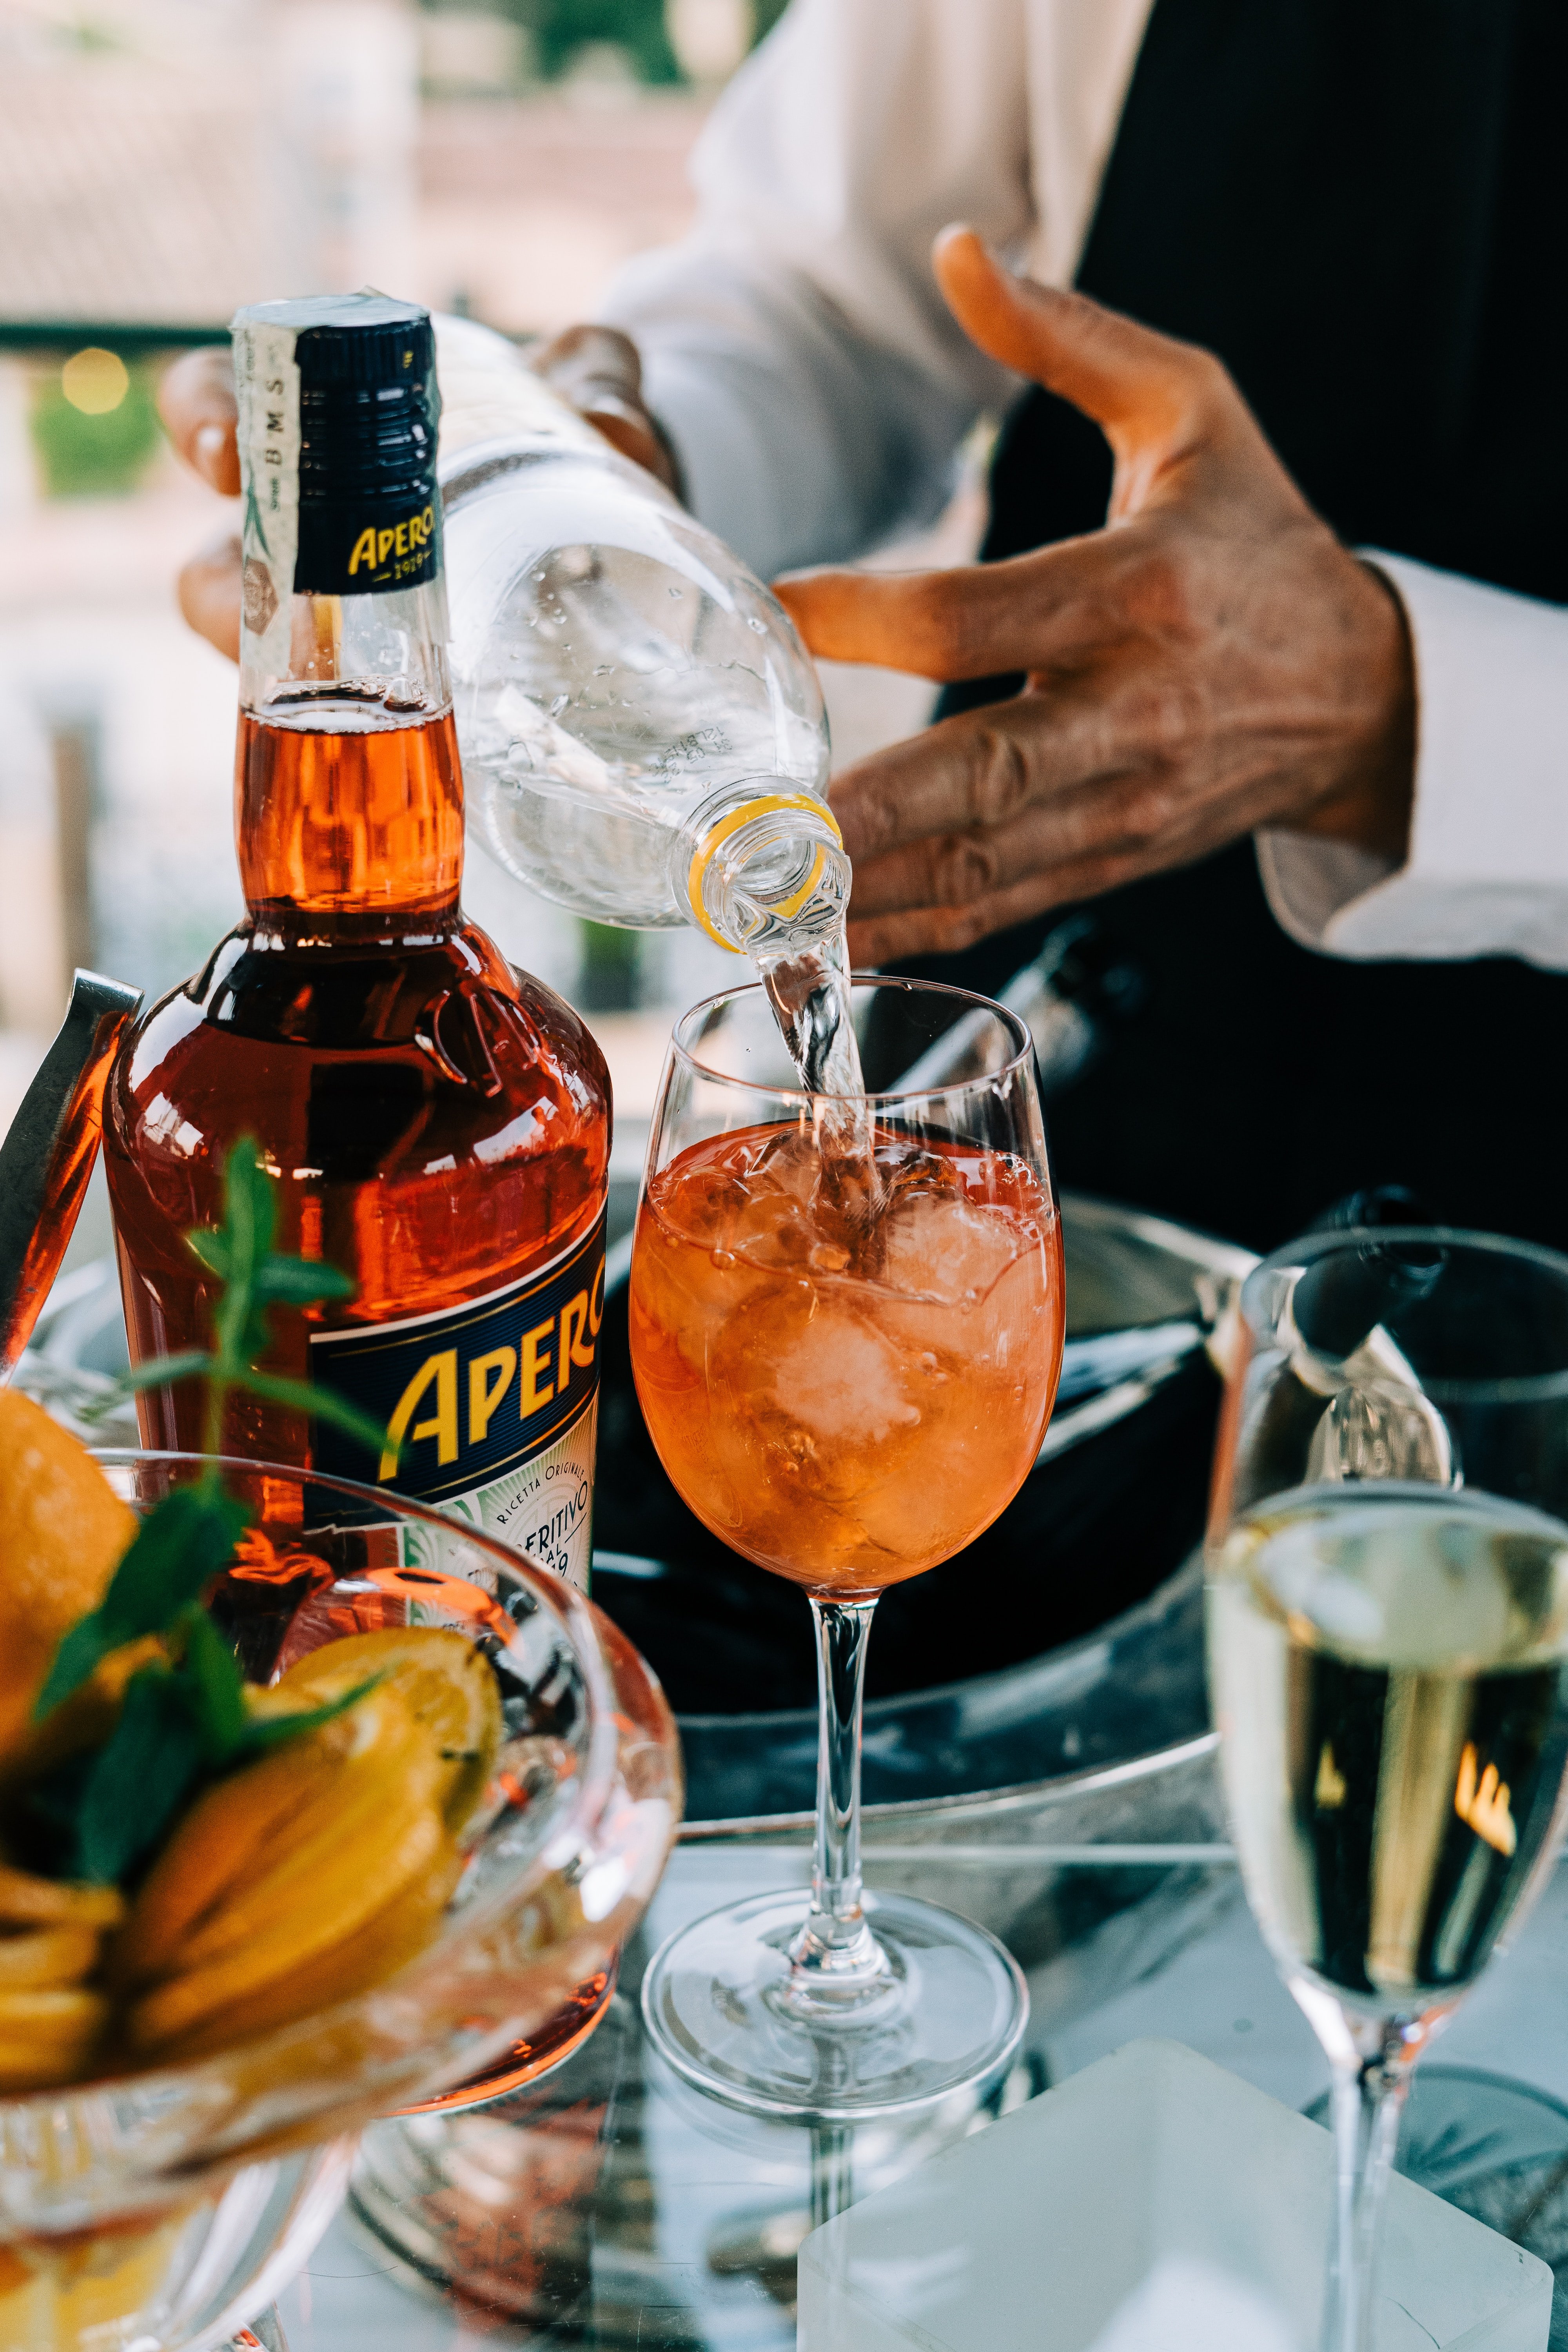 A Brief History of the Spritz